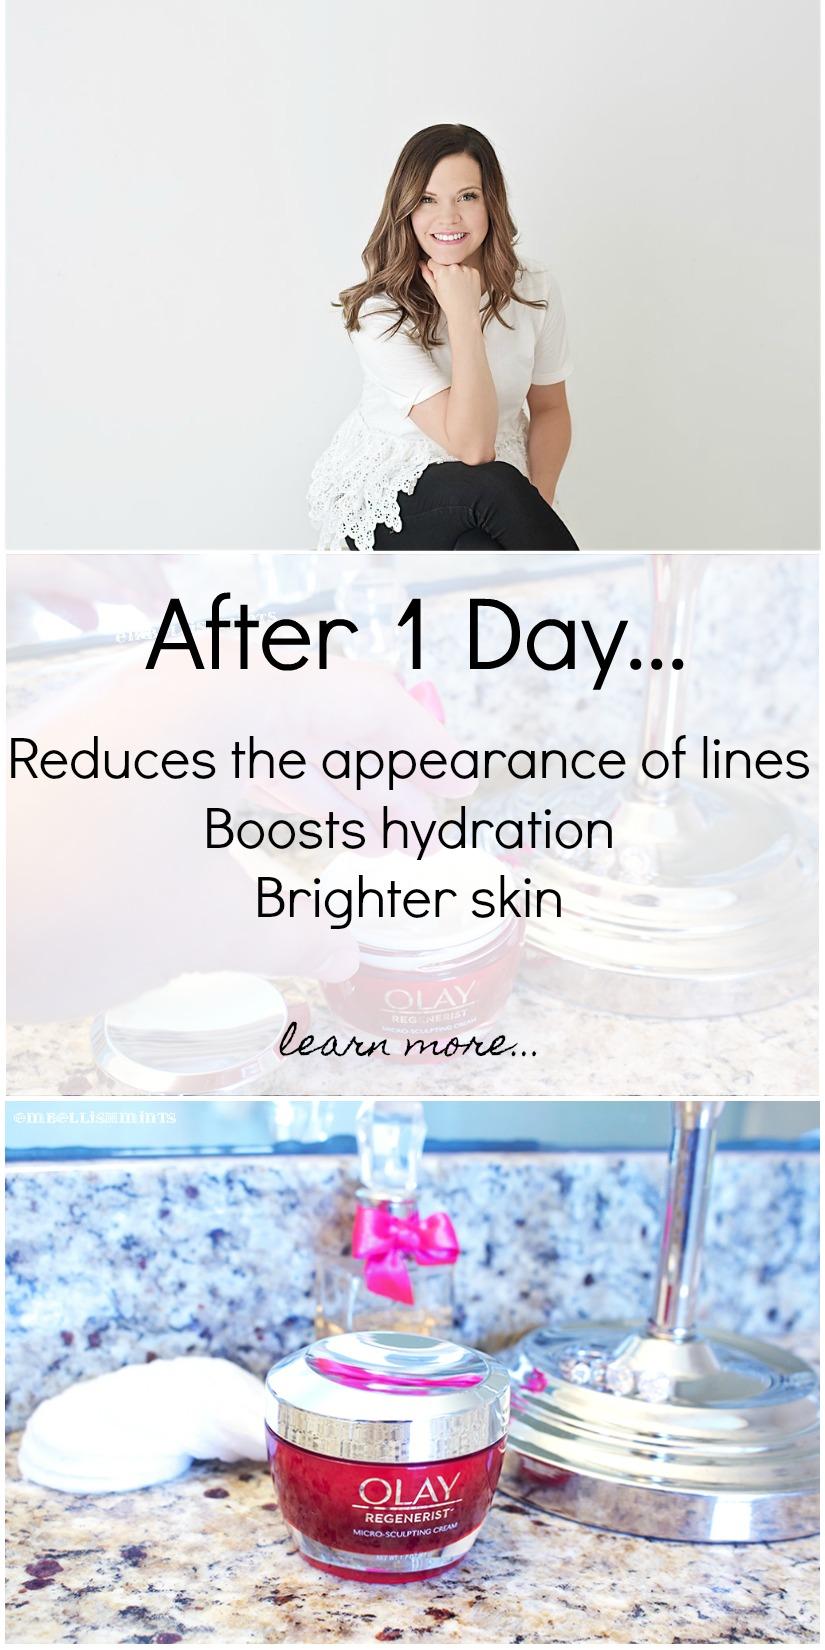 My Morning Routine and Hydrating Moisturizer